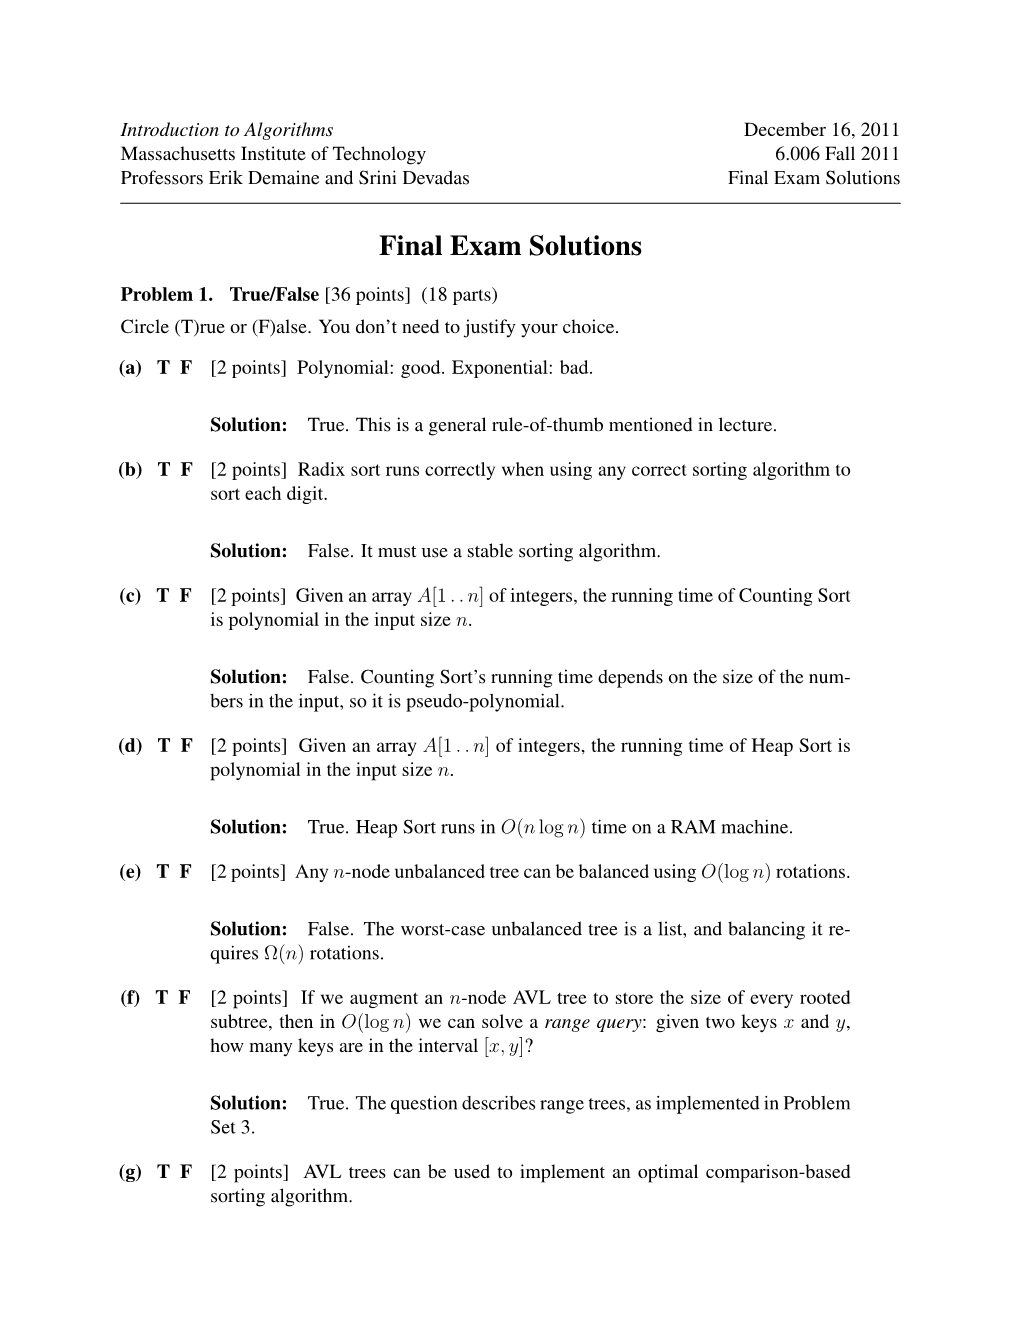 6.006 Introduction to Algorithms, Fall 2011 Final Exam Solutions